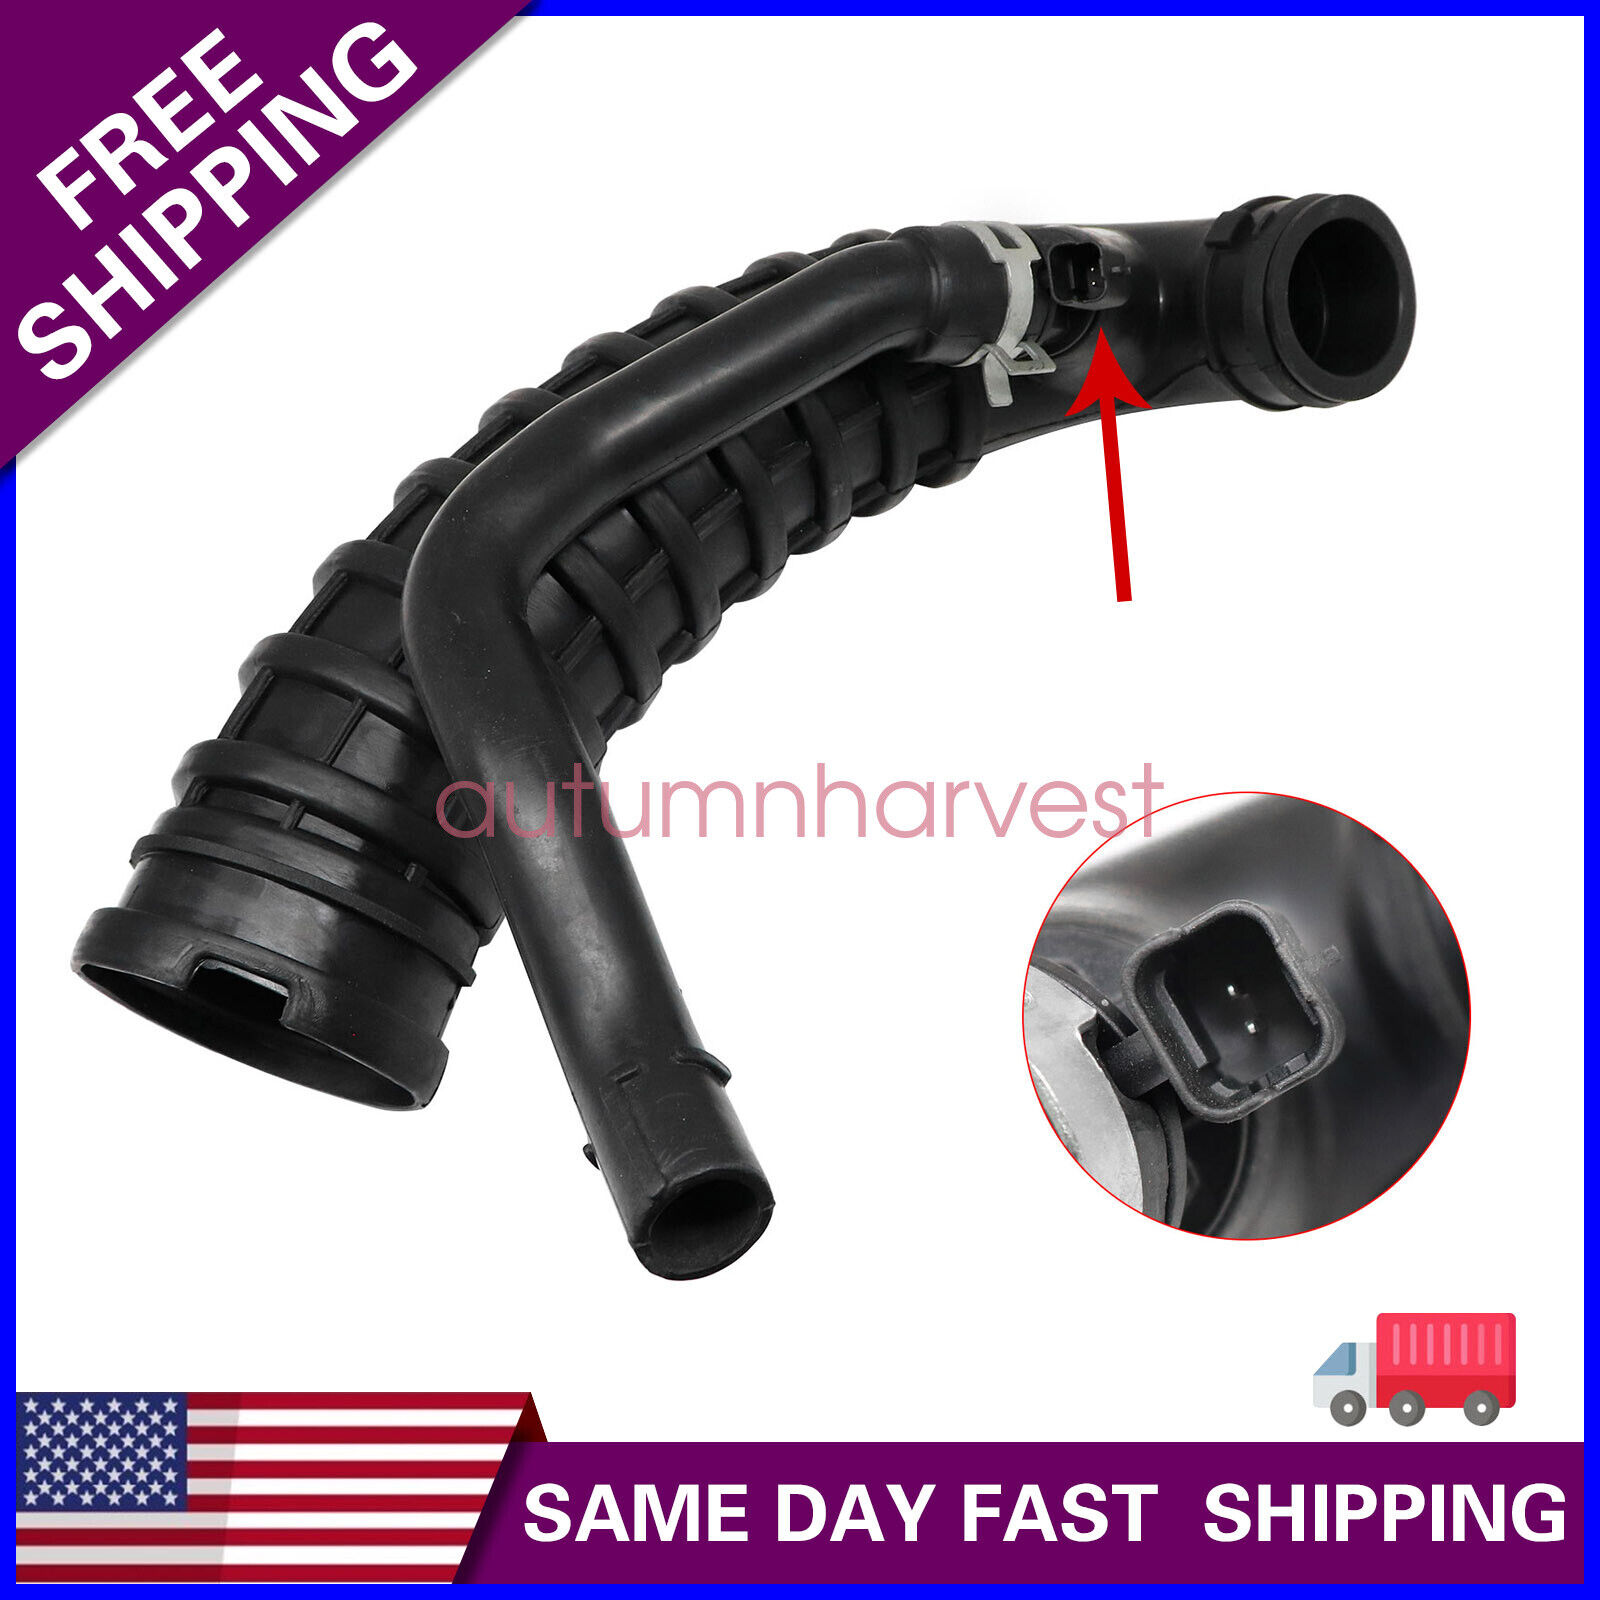 Air Intake Boot to Turbocharger for 07-10 Mini Cooper S R55 R56 R57 13717555784